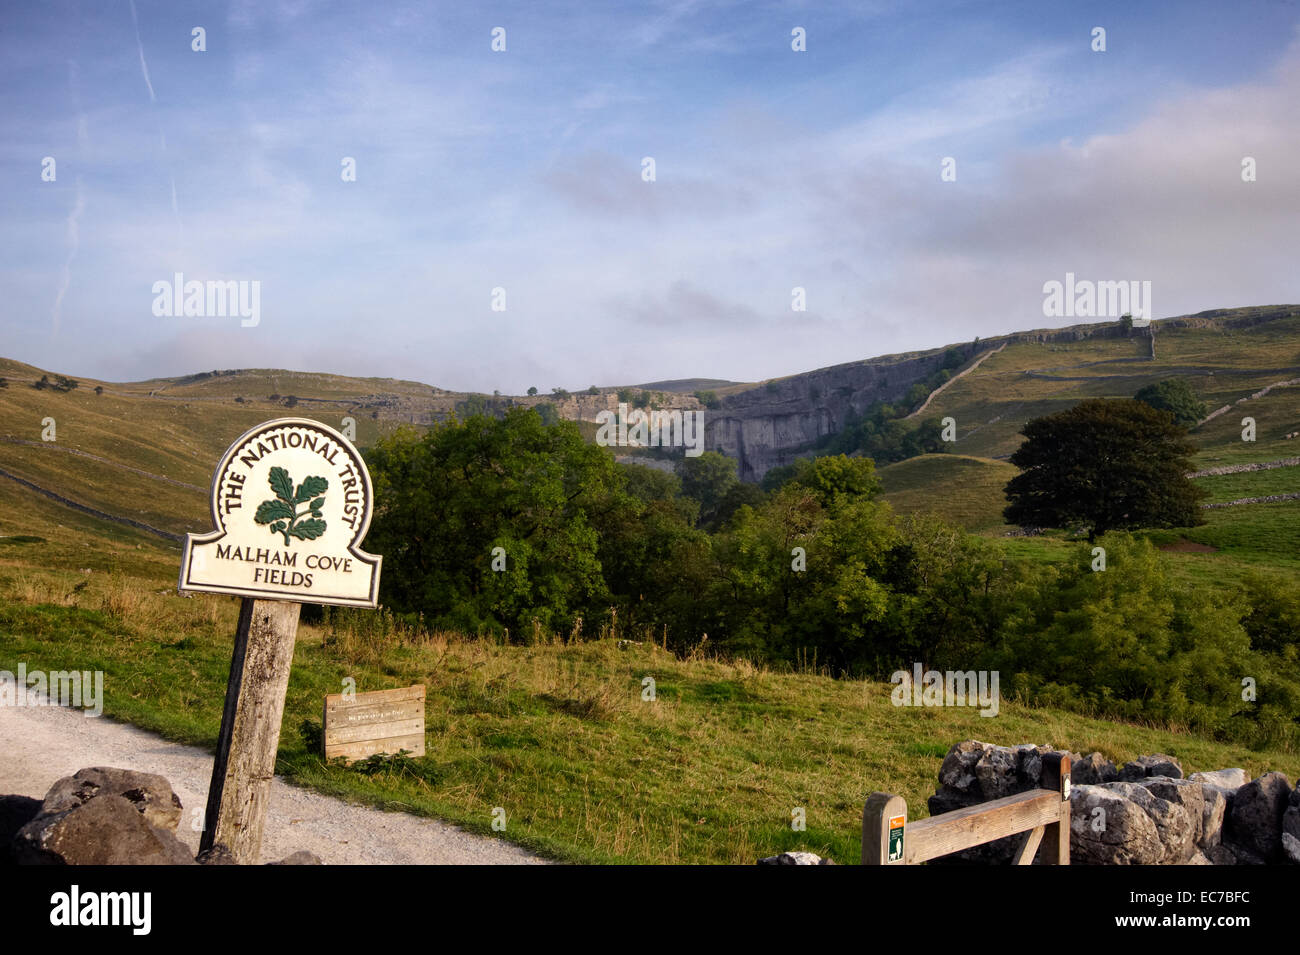 Entrance to National Trust property overlooking Malham Cove in North Yorkshire, England Stock Photo